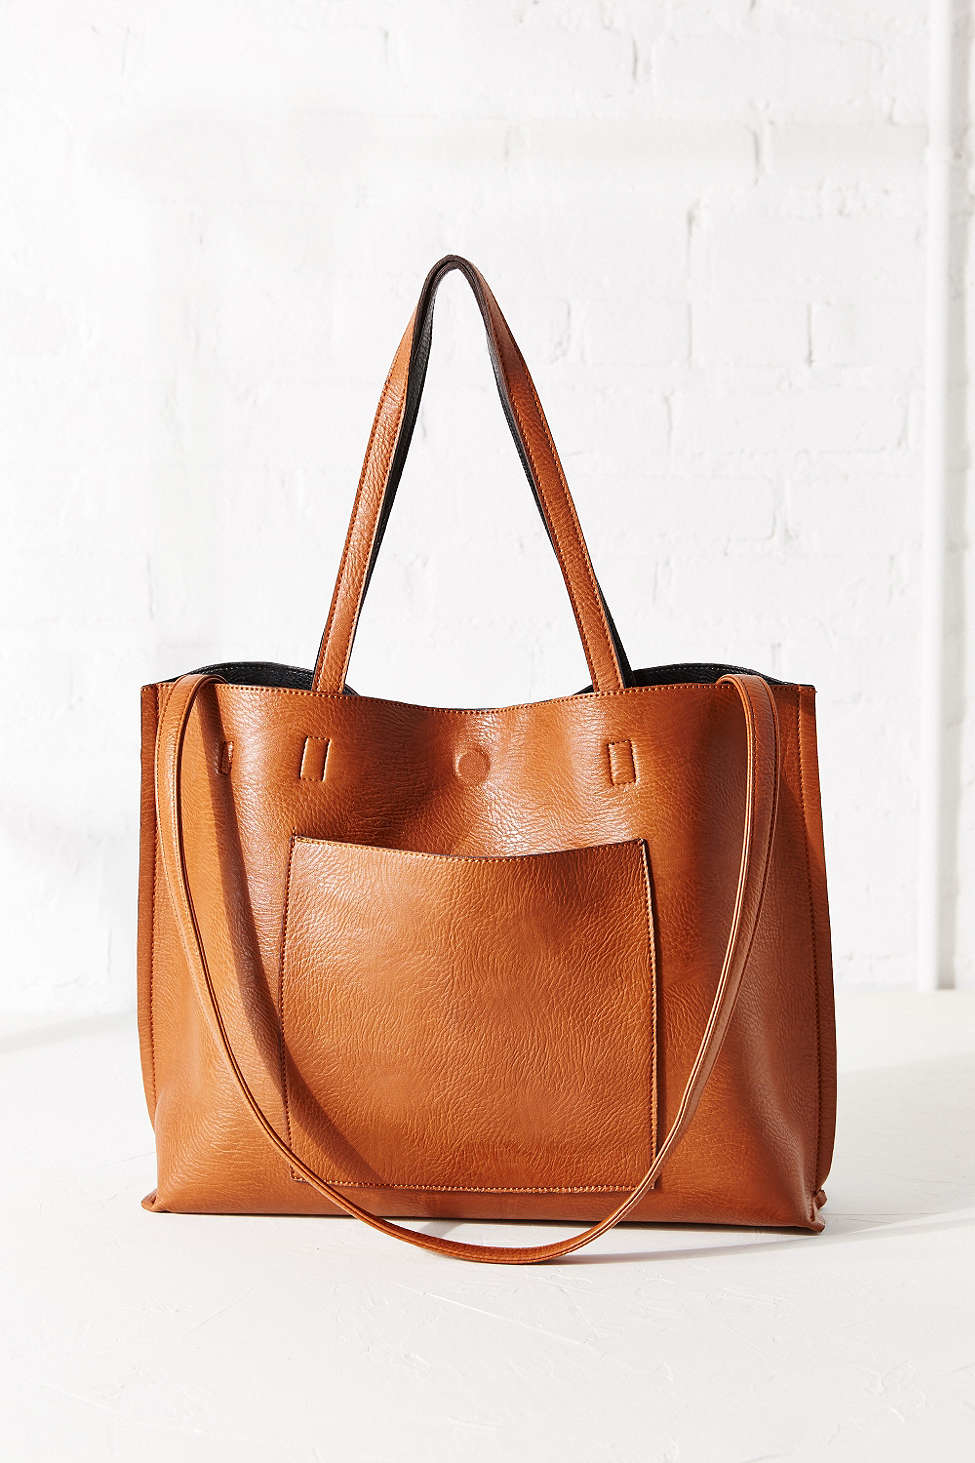 Urban outfitters Reversible Vegan Leather Tote Bag in Natural | Lyst